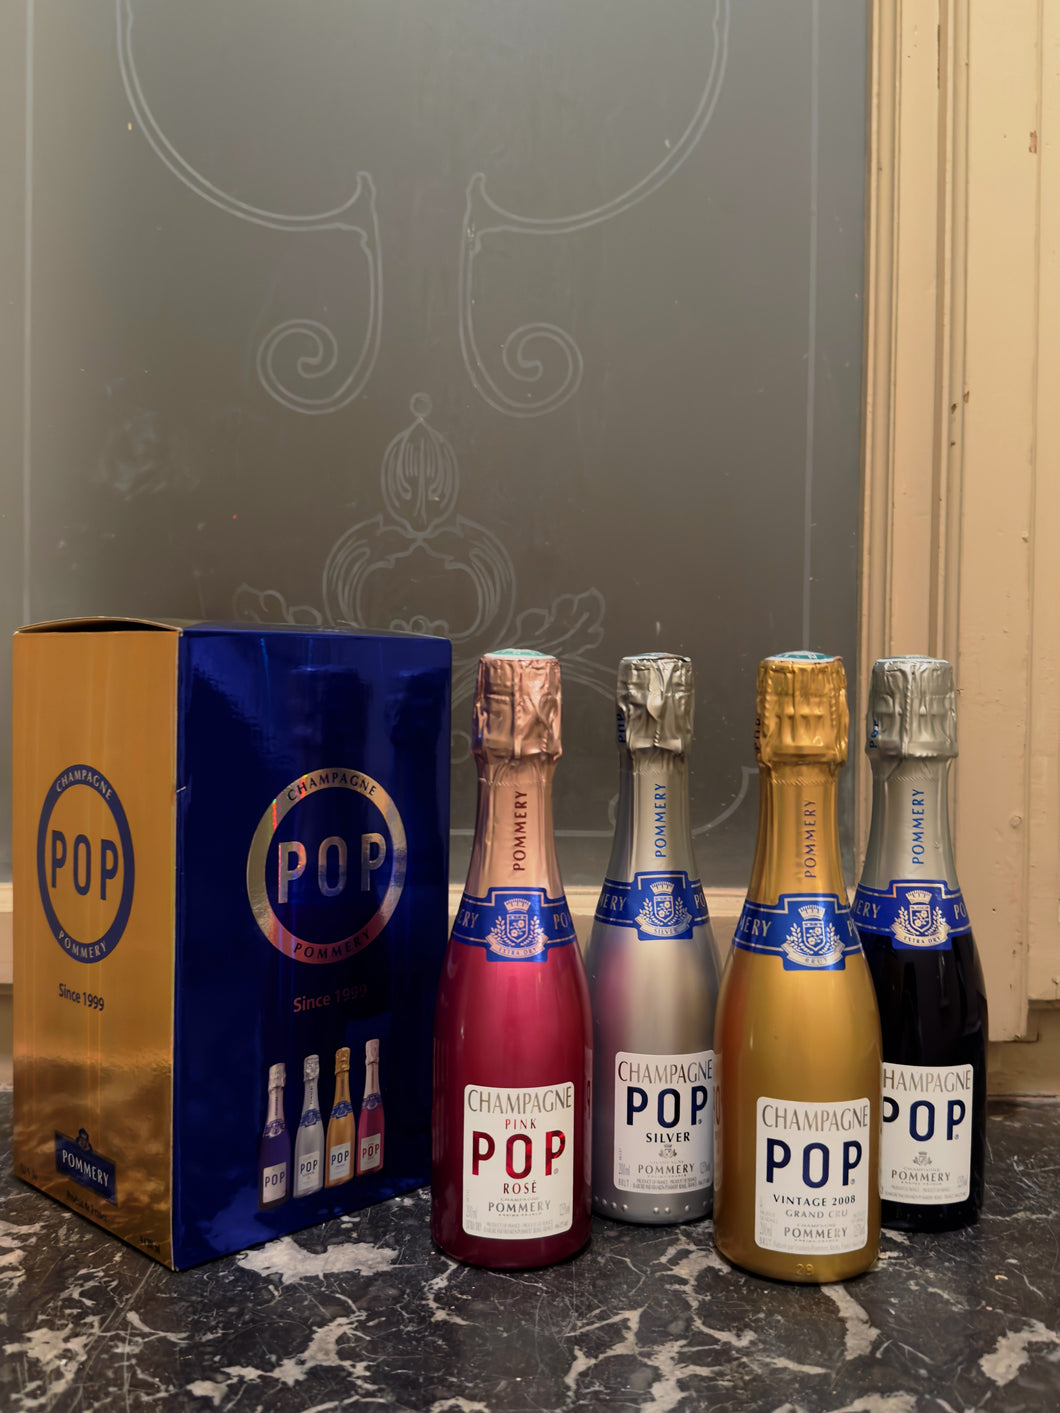 CHAMPAGNE POMMERY POP SINCE 1999 4 x 20 cL GIFT BOX, GIFT BAG